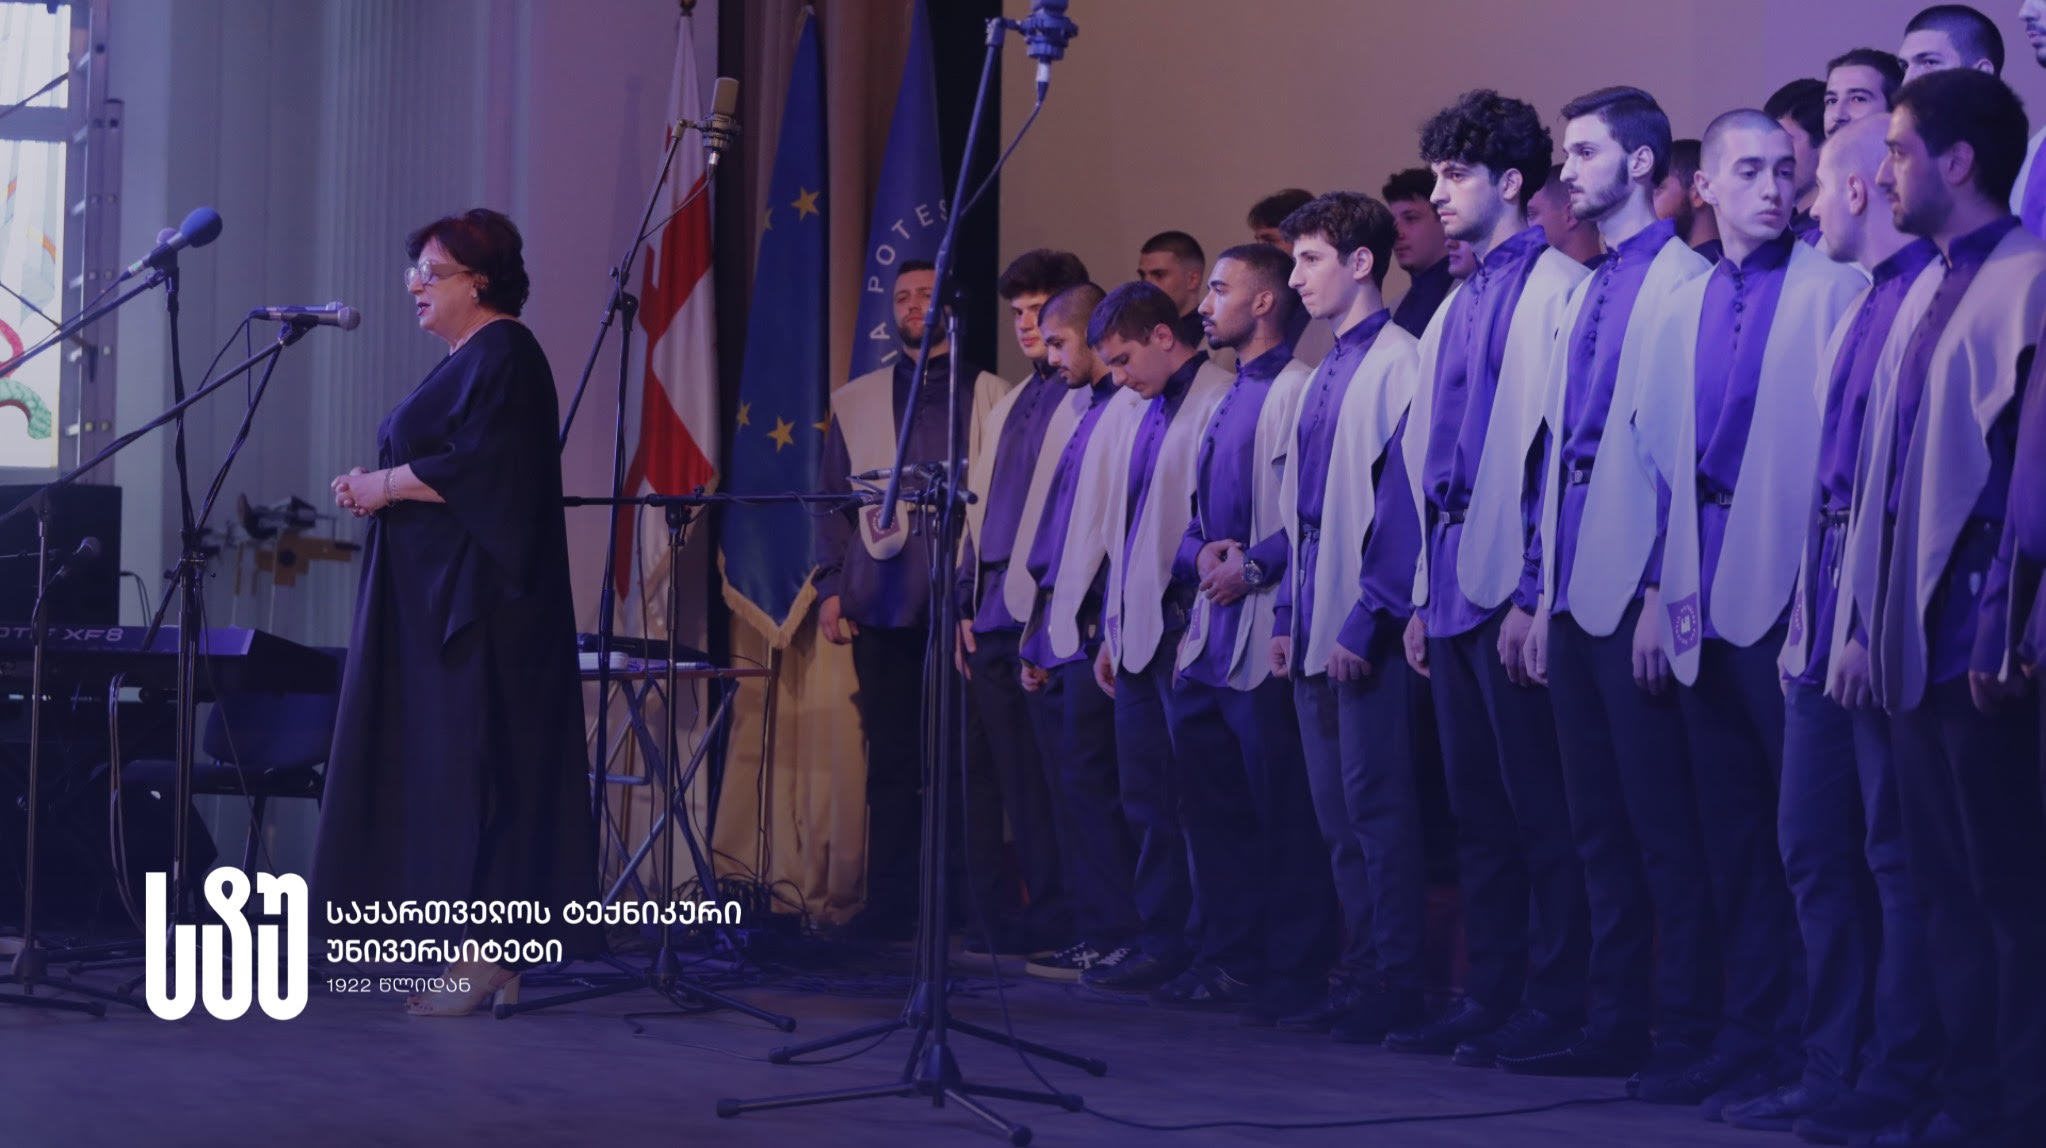 The series of events dedicated to the 60th anniversary of the Yuza Kublashvili Men’s Public Capella at GTU has started